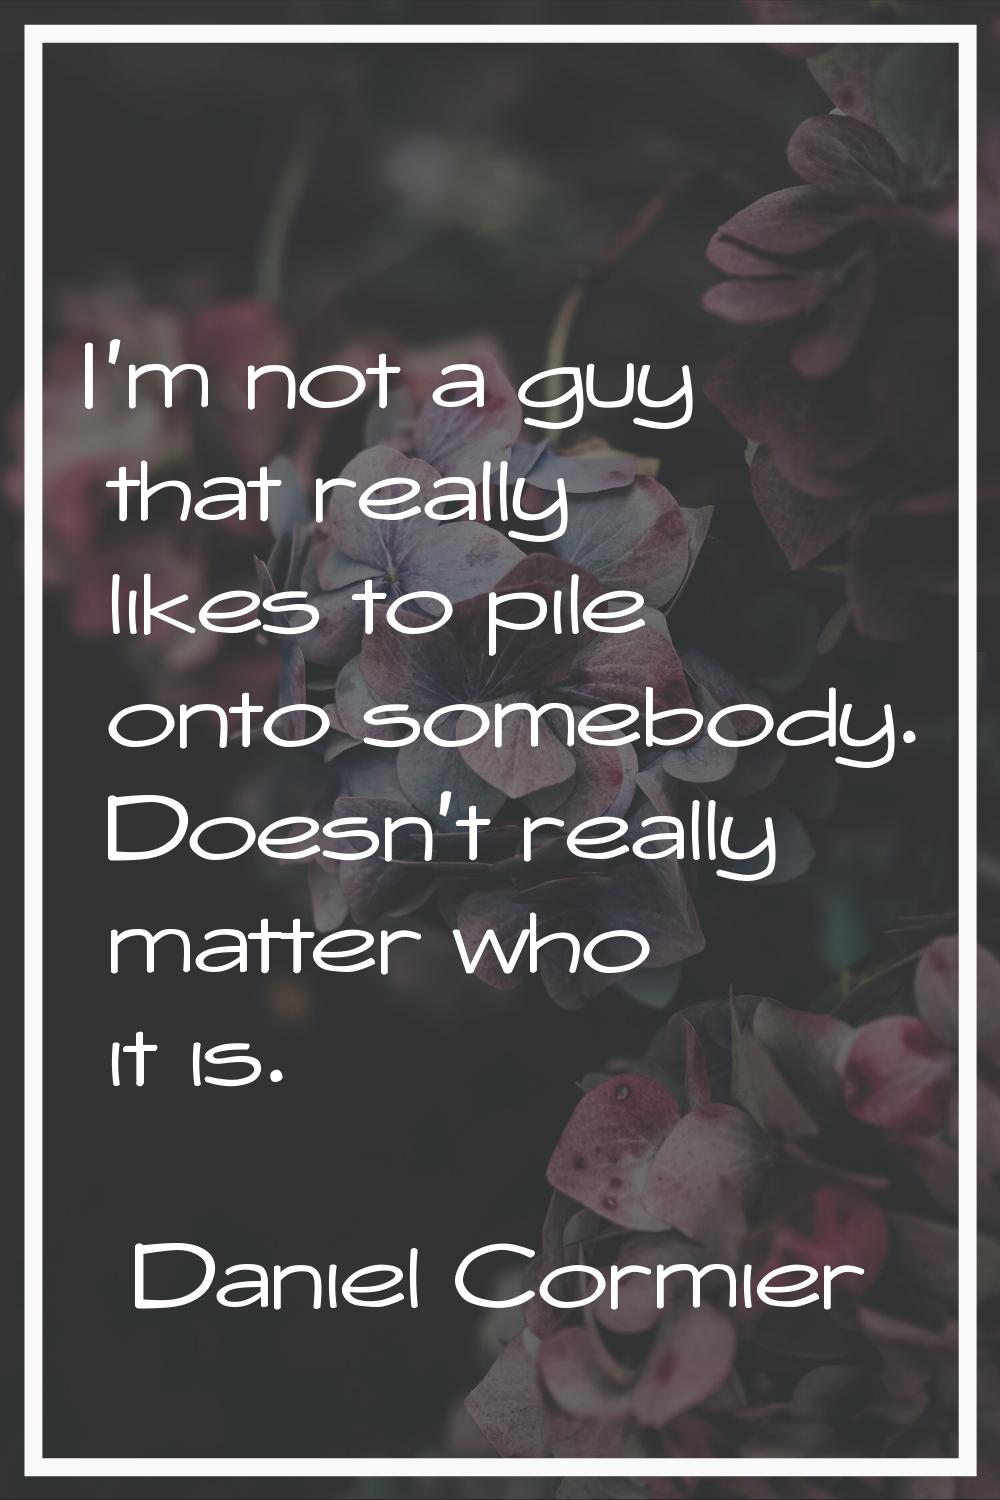 I'm not a guy that really likes to pile onto somebody. Doesn't really matter who it is.